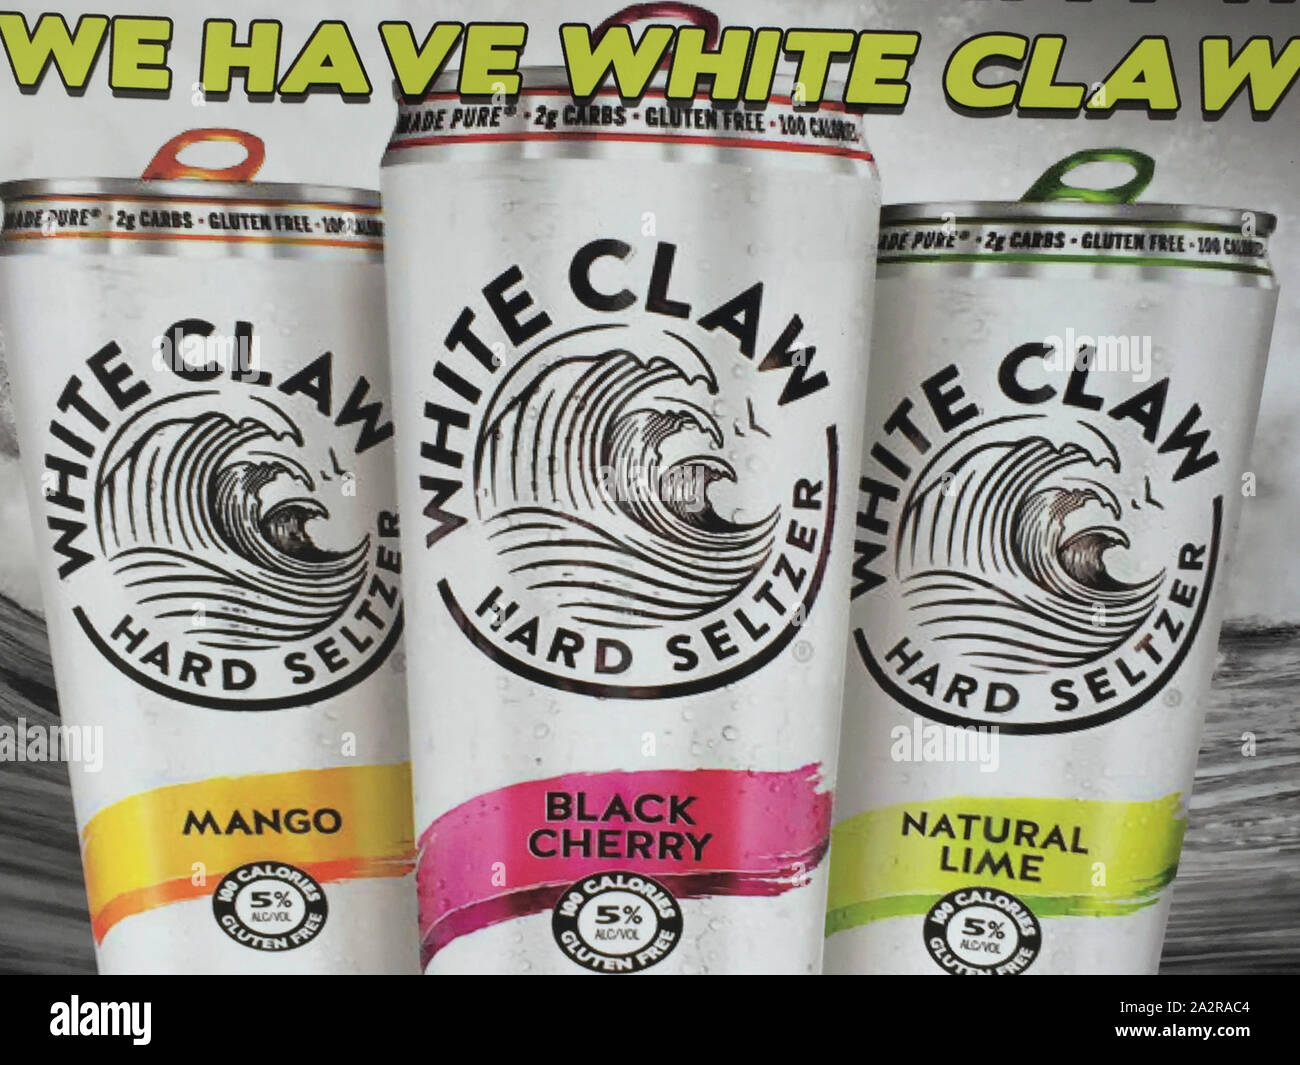 White Claw Hard Seltzer is an alcoholic water beverage, USA Stock Photo